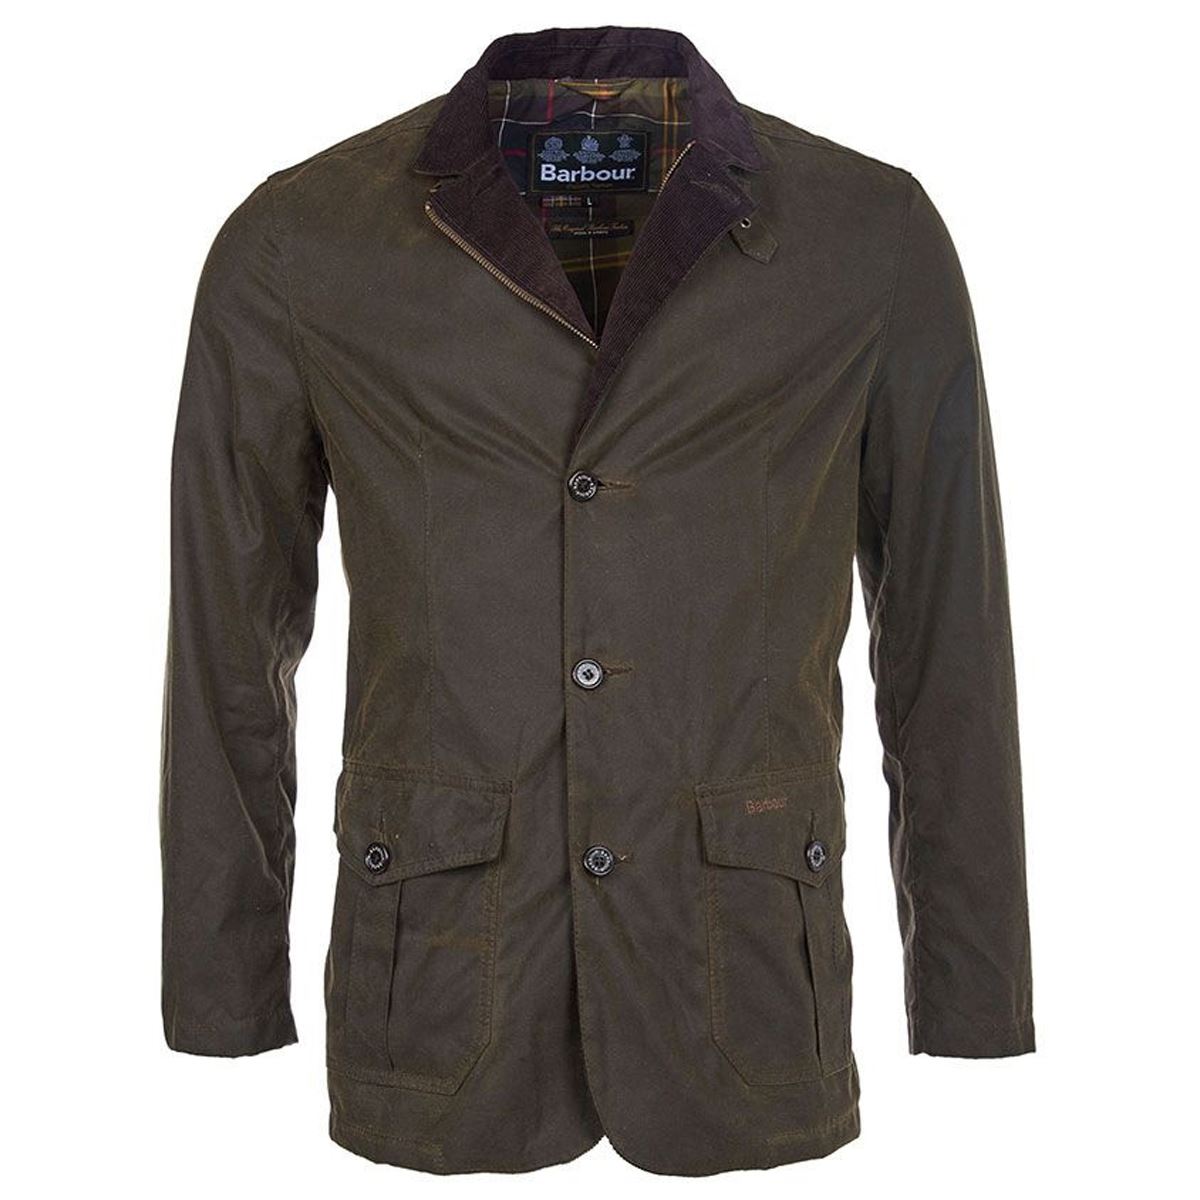 Can the Barbour Lutz Jacket be re-waxed for maintenance?